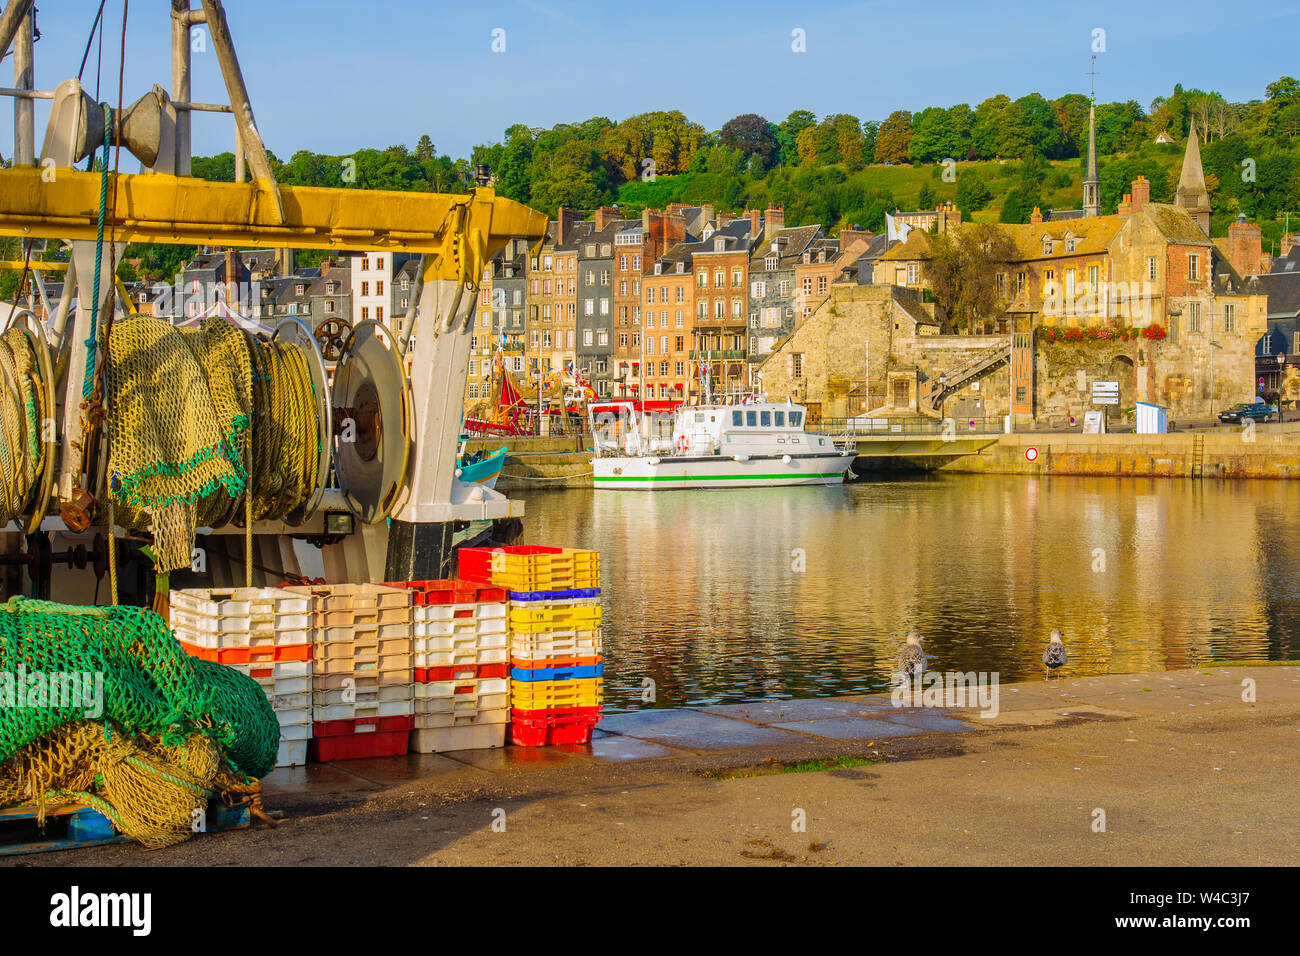 Scene of Vieux Port (Old Harbor), houses and boats in Honfleur, France  Honfleur is located in Calvados, Normandy. It is famous for its old port  Stock Photo - Alamy